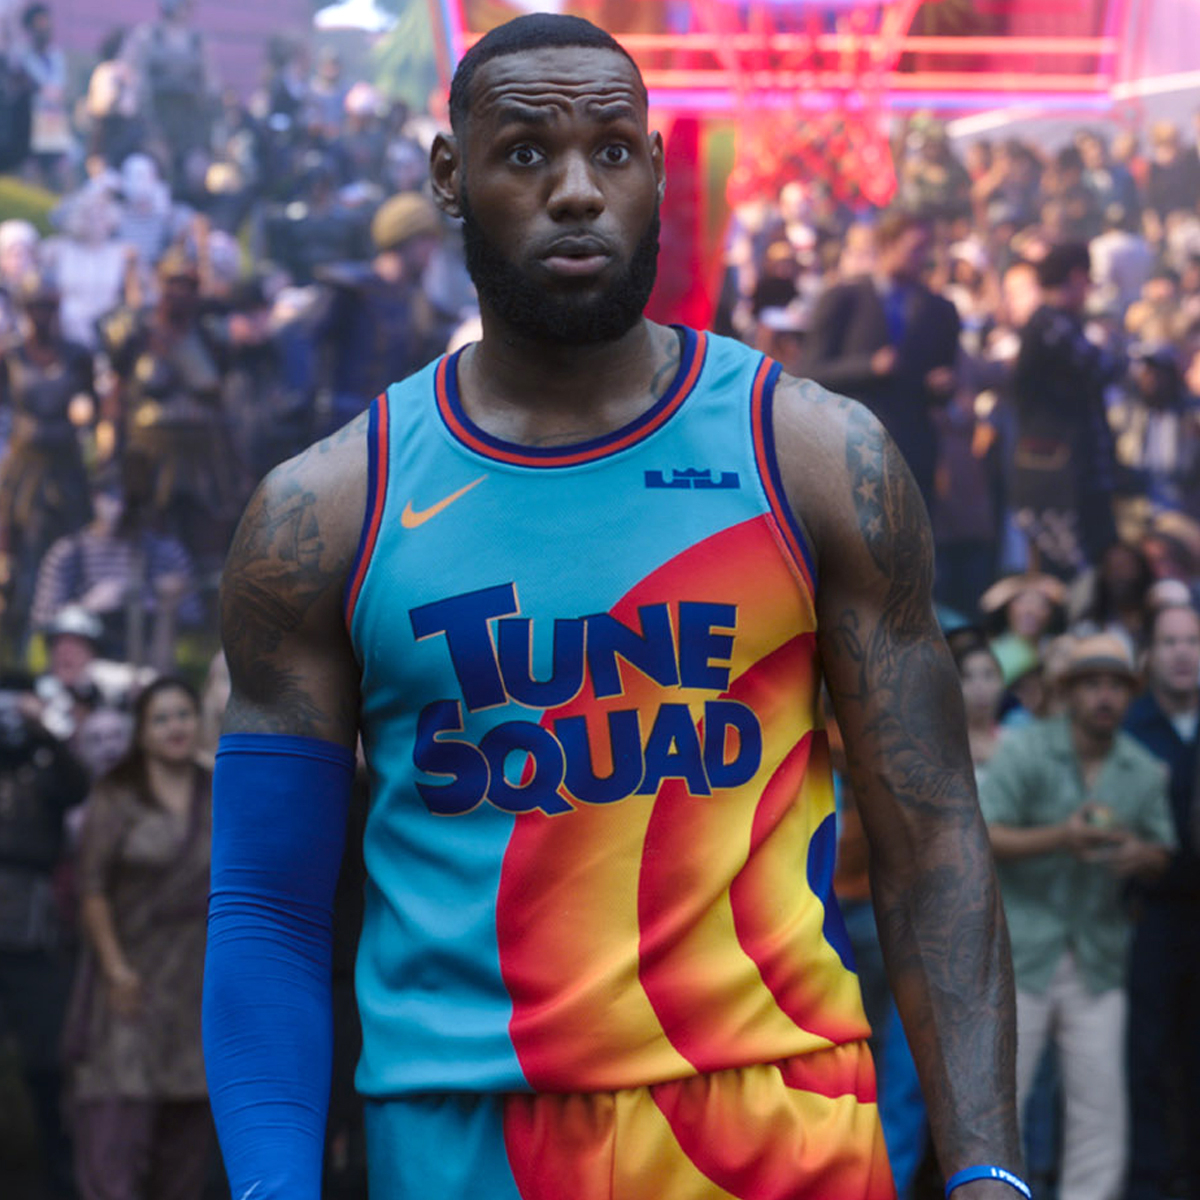 Space Jam 2 Trailer Features Game of Thrones